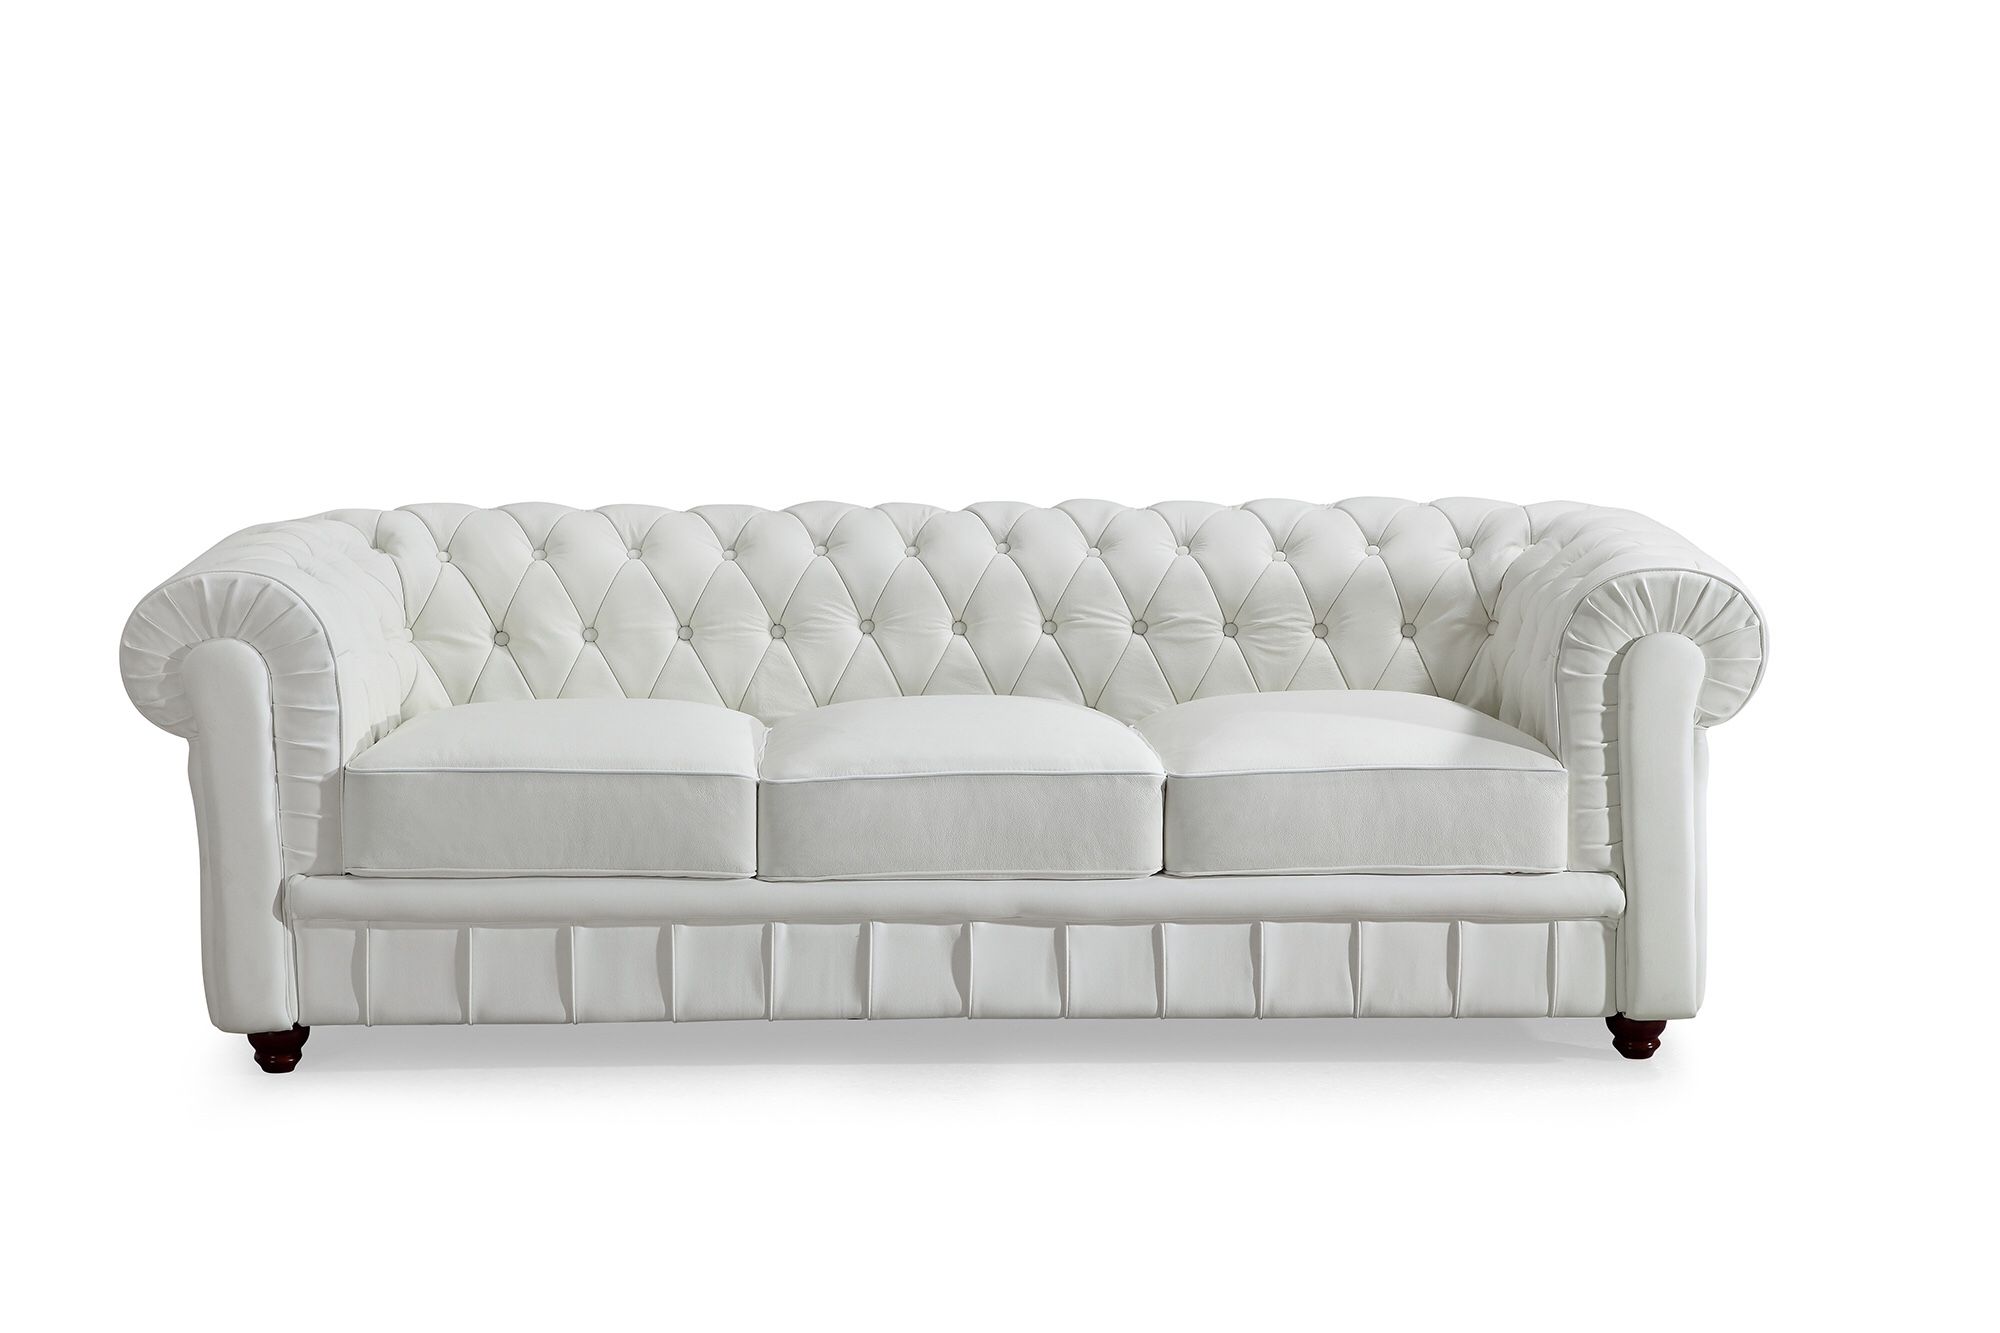 Chesterfield Design Sofa Couch for Living Room Leather Surface 